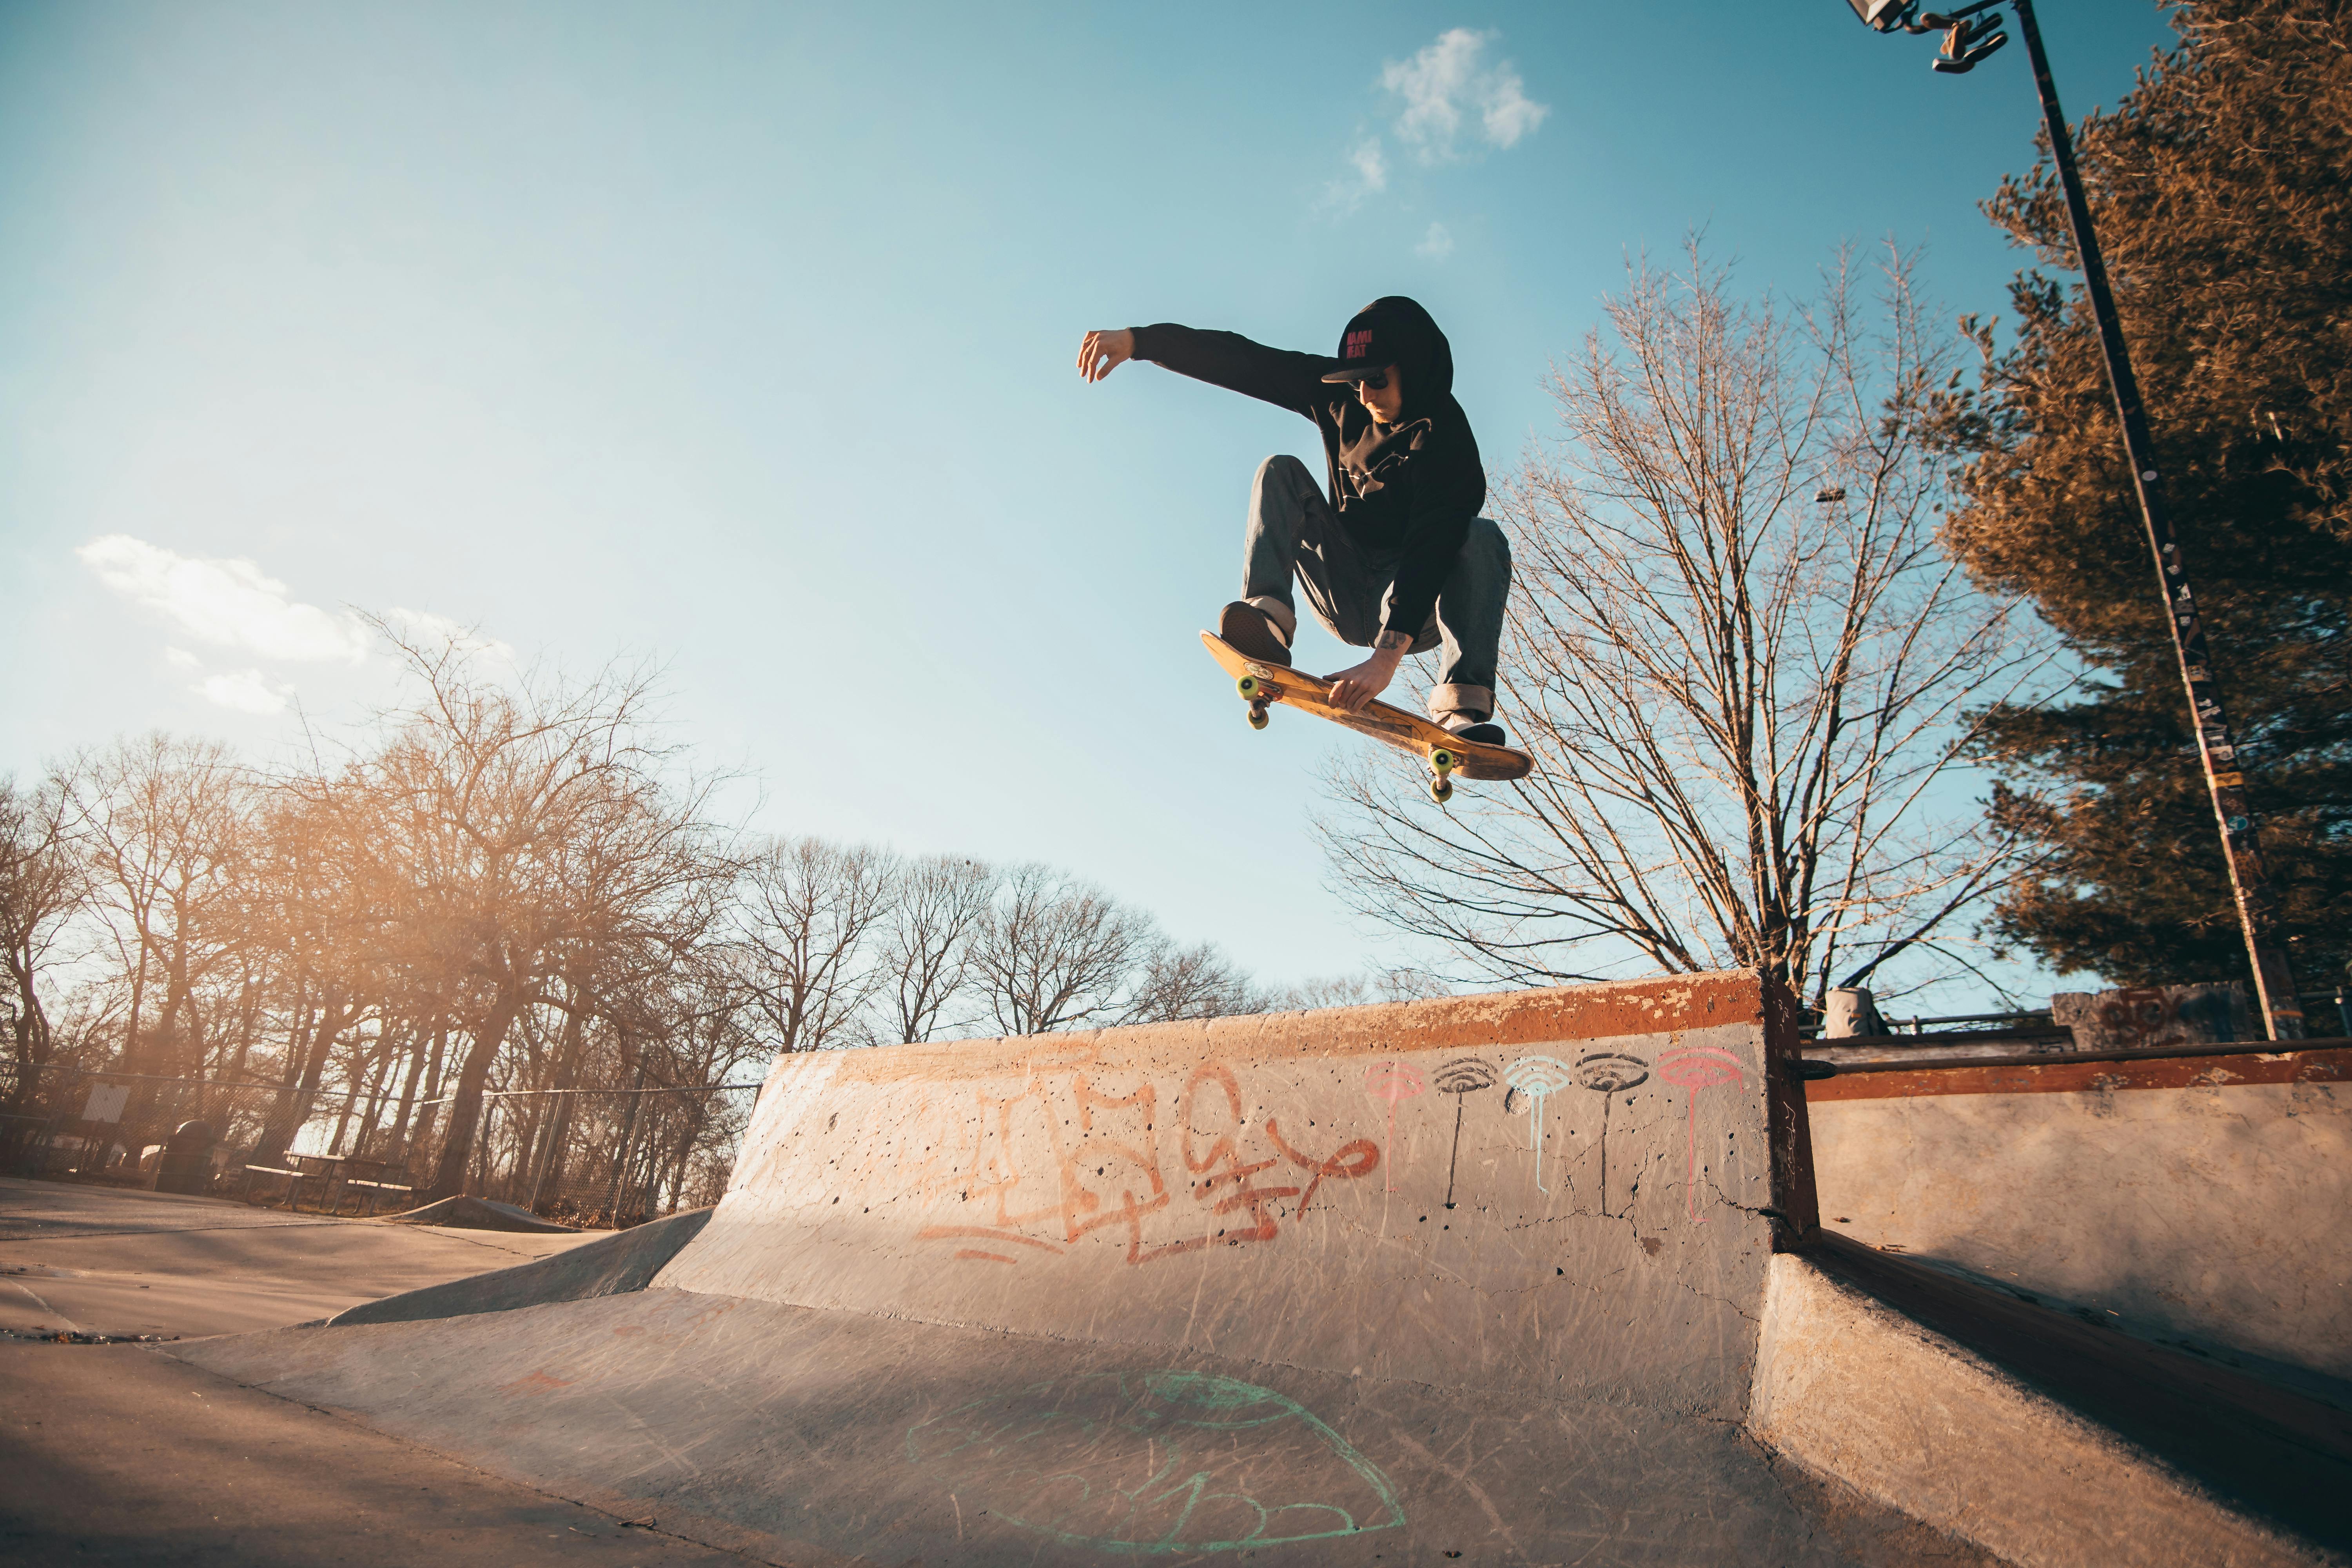 Skateboard Photos, Download The BEST Free Skateboard Stock Photos & HD  Images